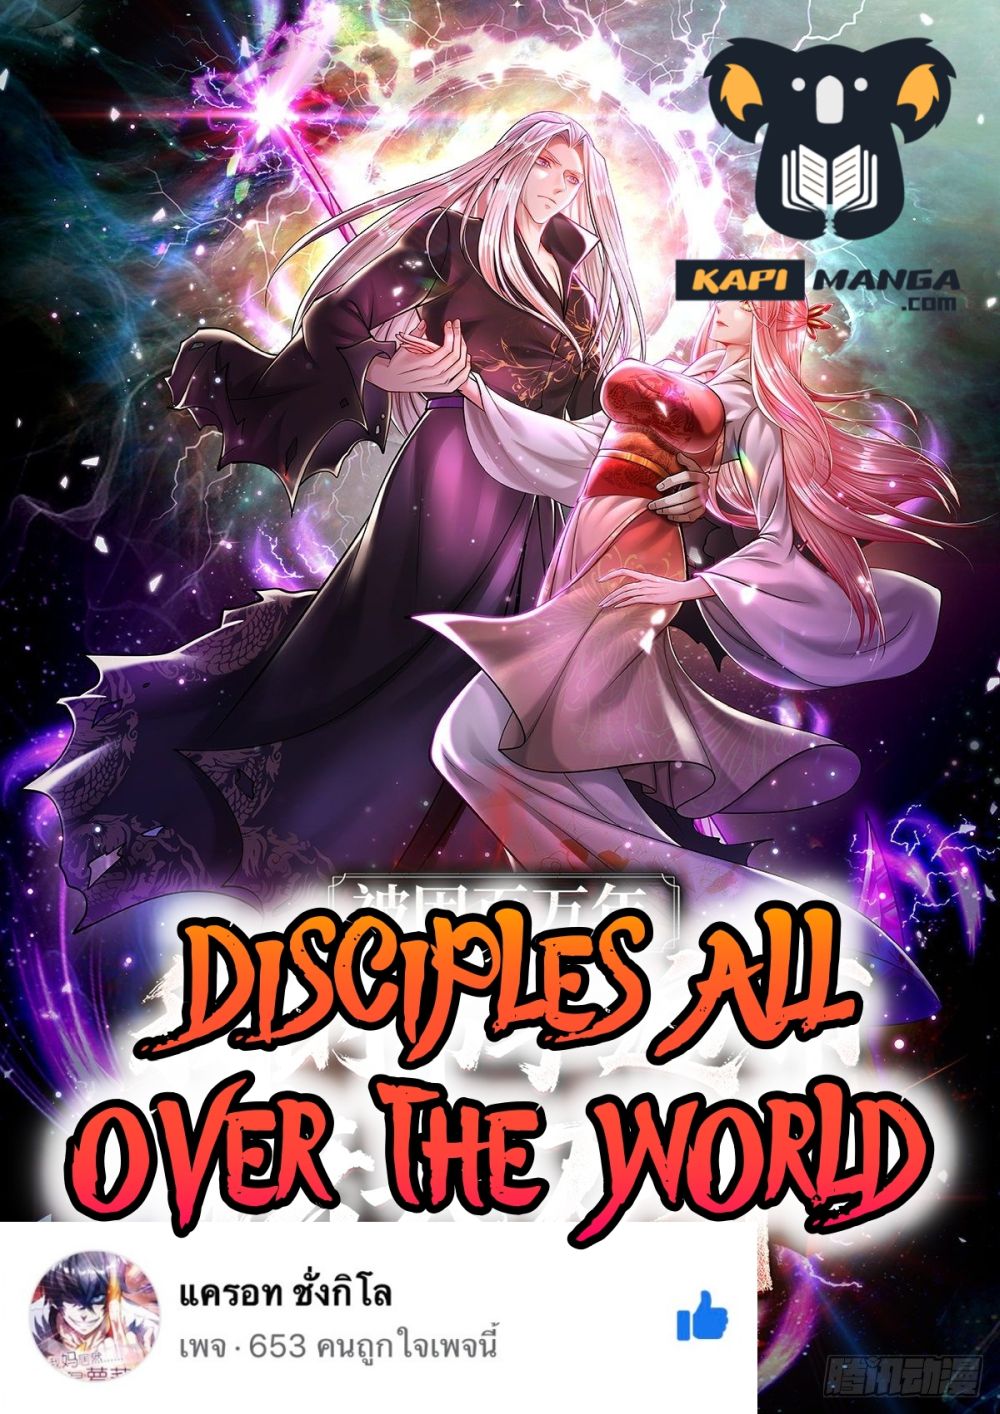 Disciples All Over the World à¸à¸­à¸à¸à¸µà¹ 42 (1)